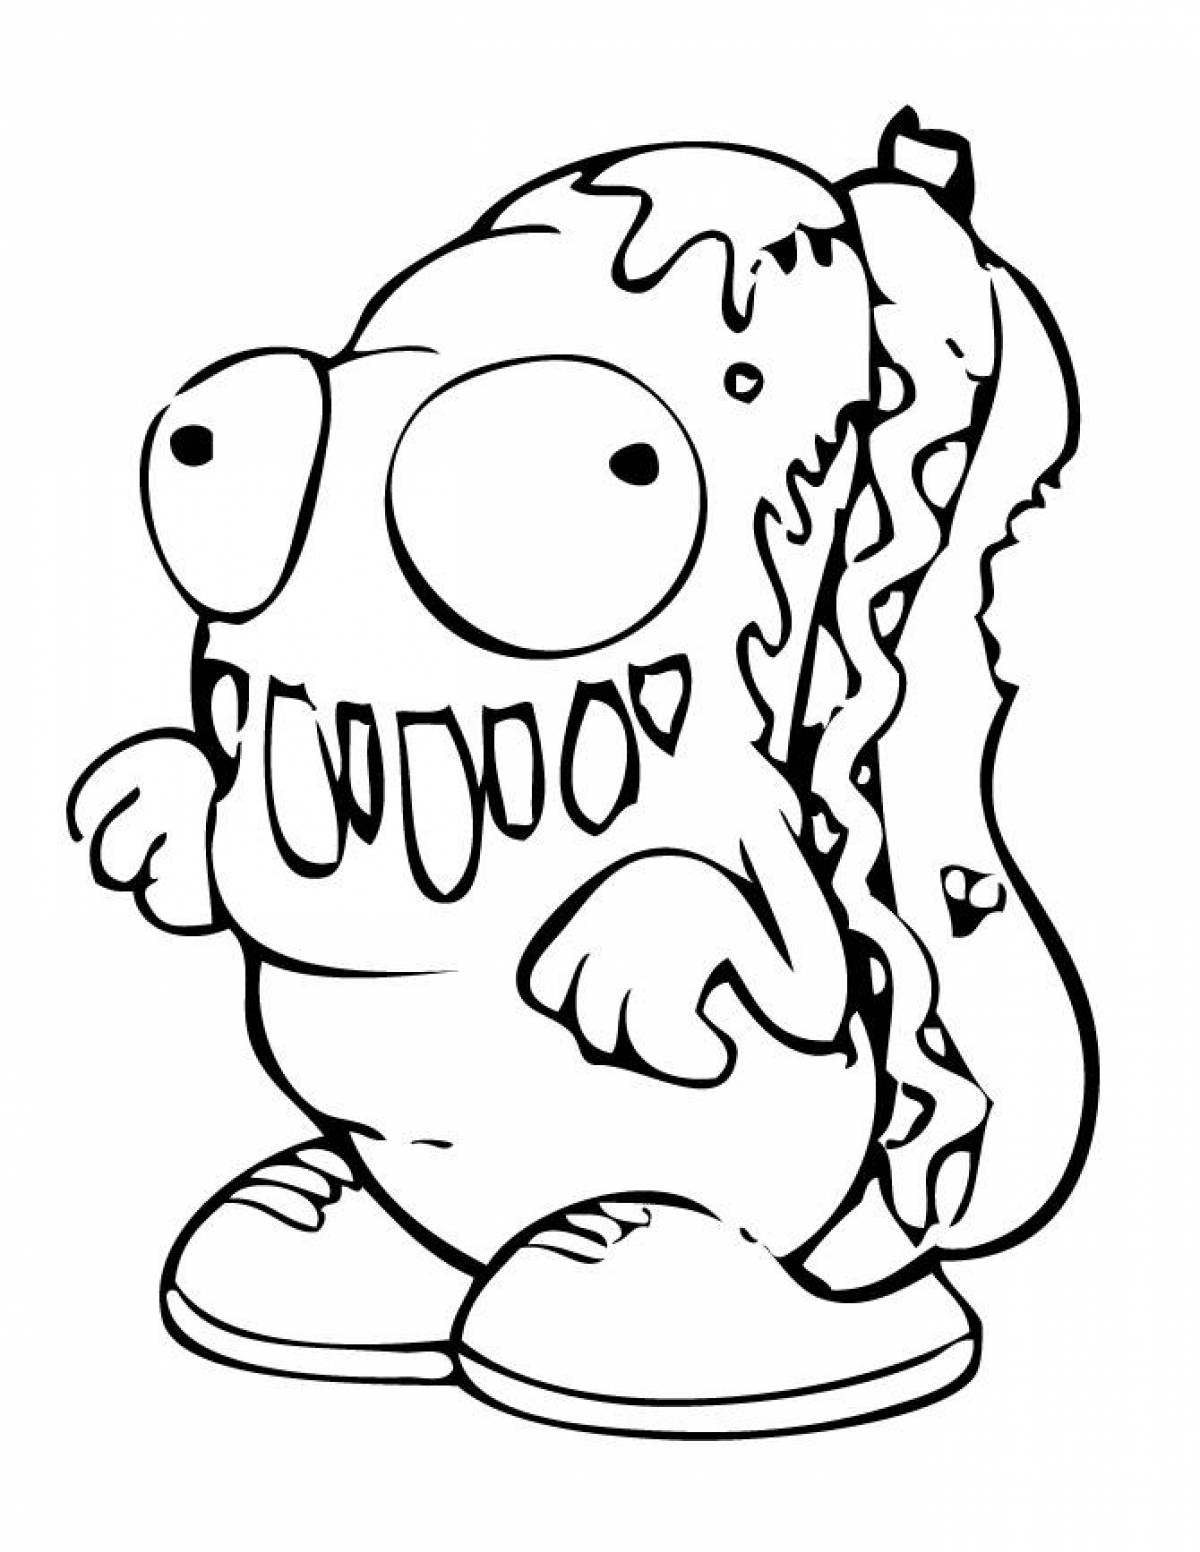 Disturbing monster coloring pages